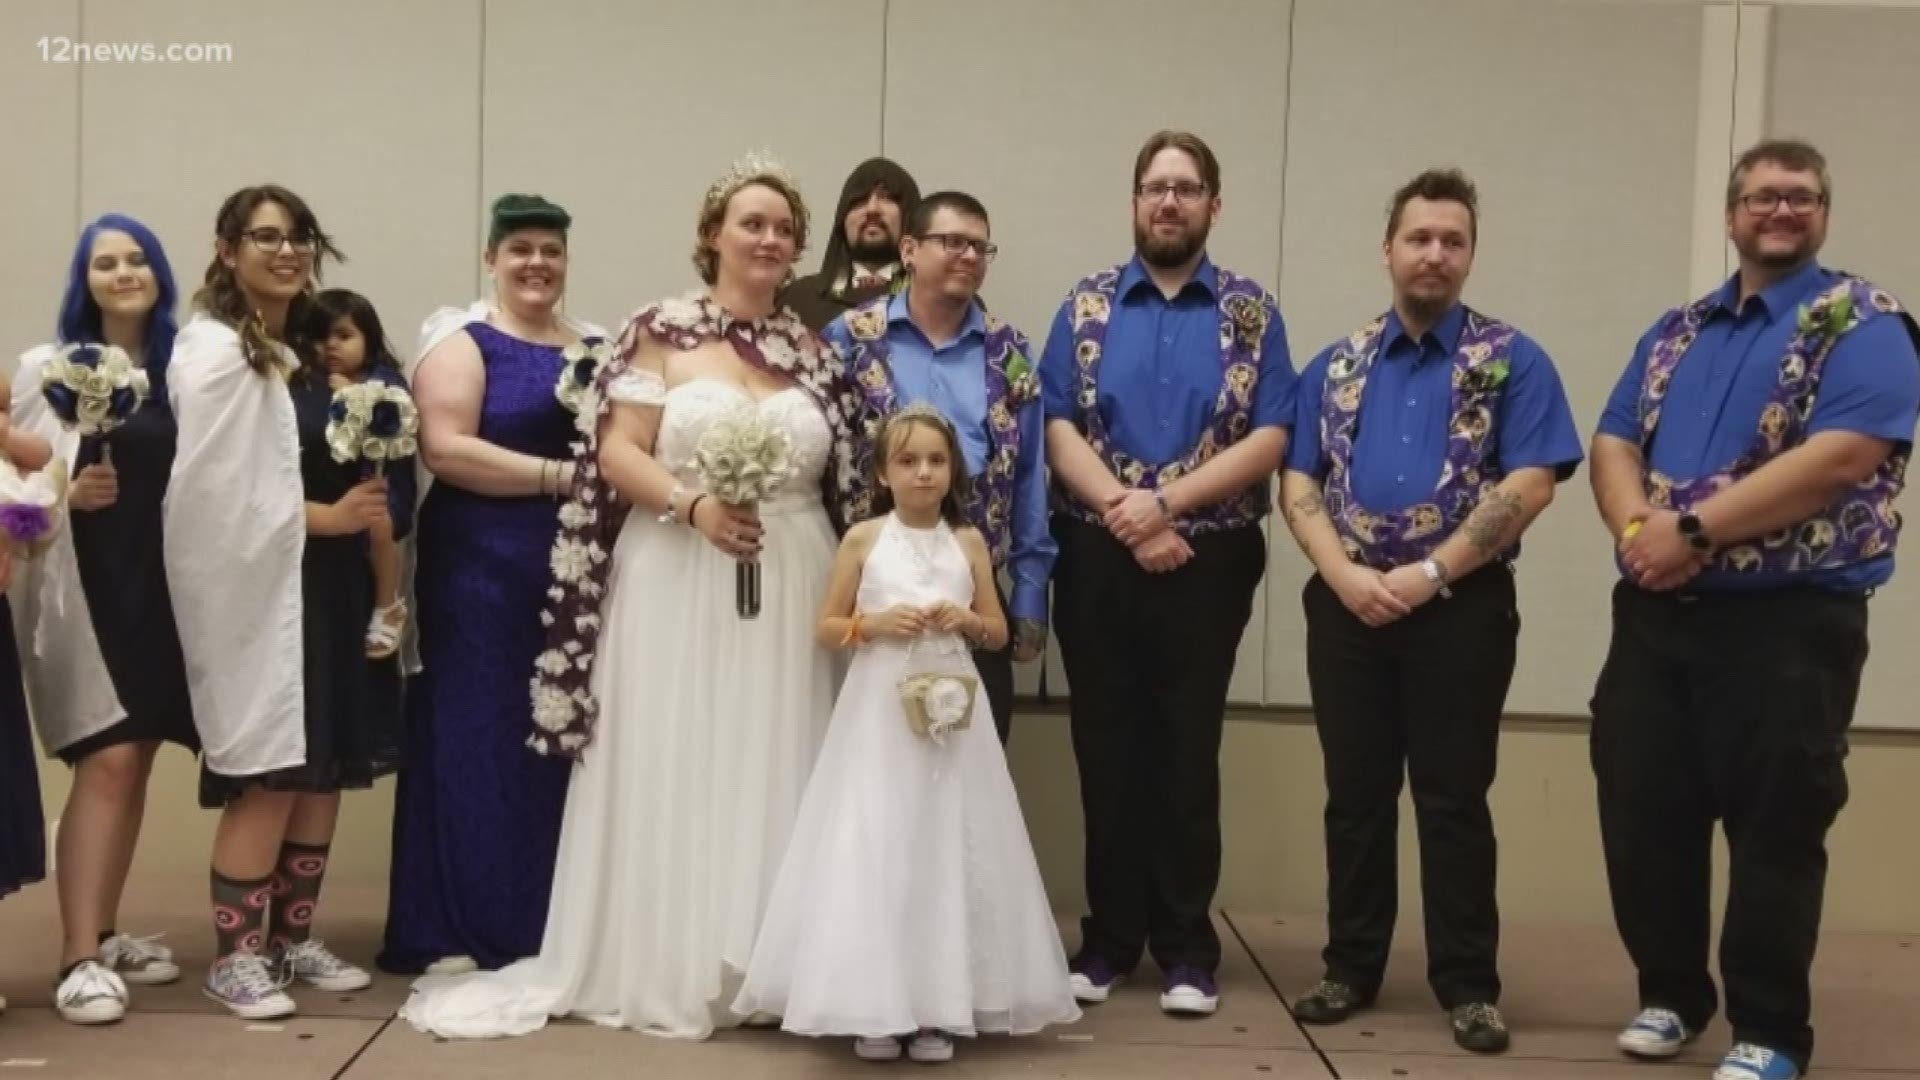 Thousands of like-minded people are flooding downtown Phoenix for Fan Fusion. One couple is bringing their whole crew to watch them get married in their nerdiest best!